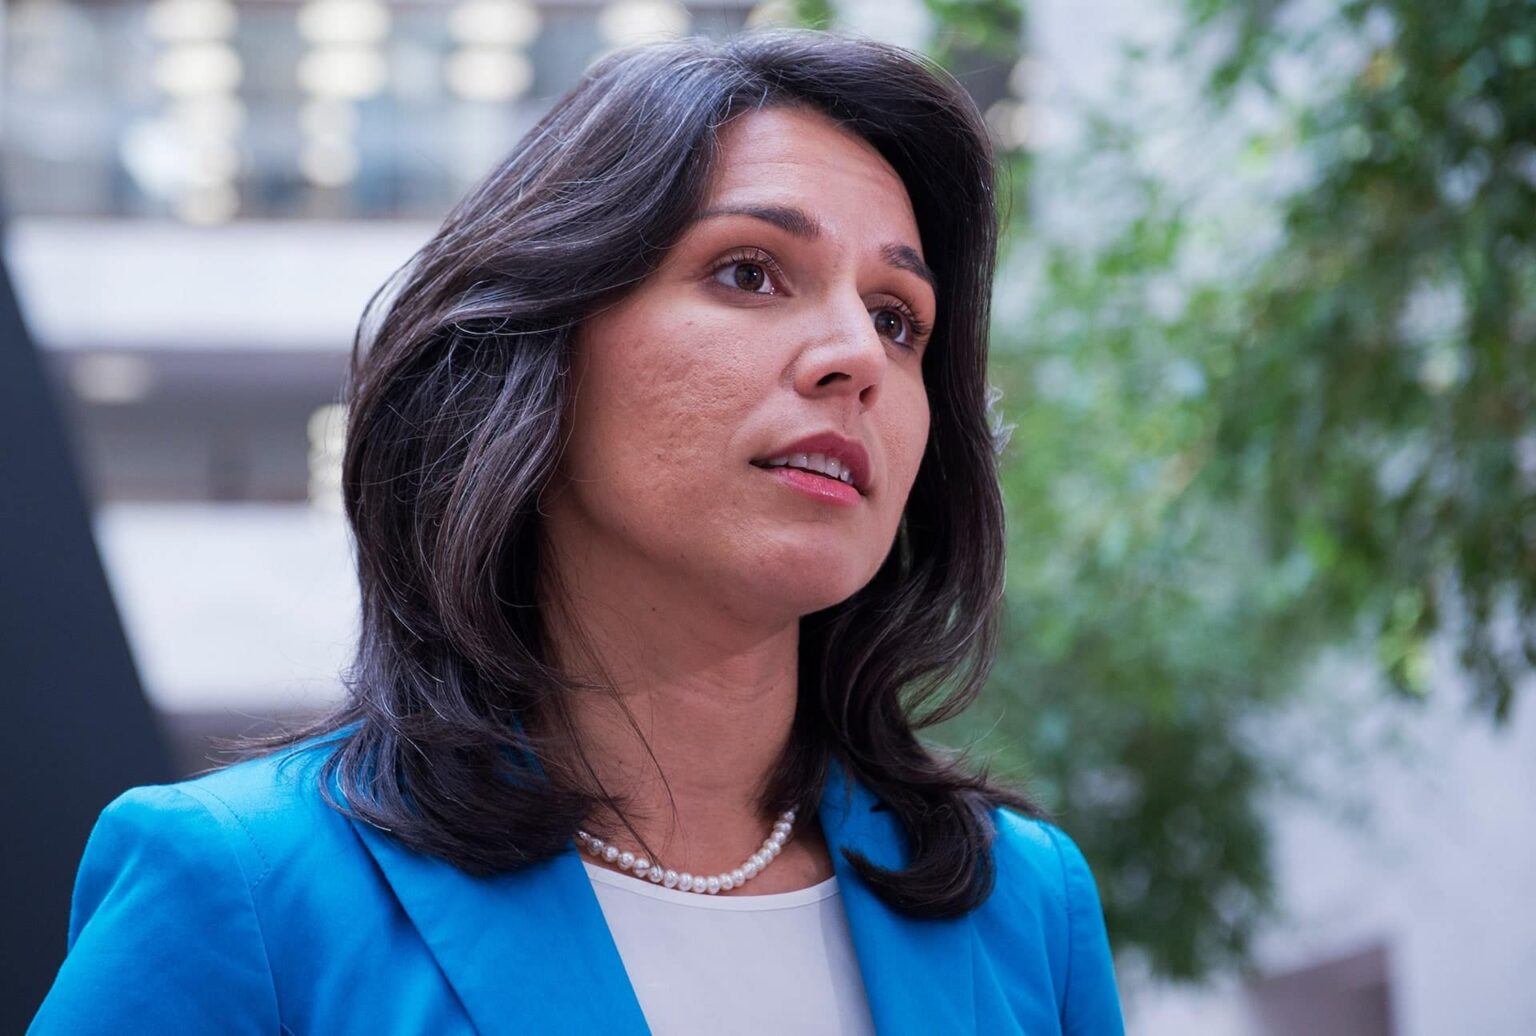 Rumor has it, Tulsi Gabbard was raised in a cult. Besides her homophobic tendency, is this Hawaiian politician far more problematic than we thought?